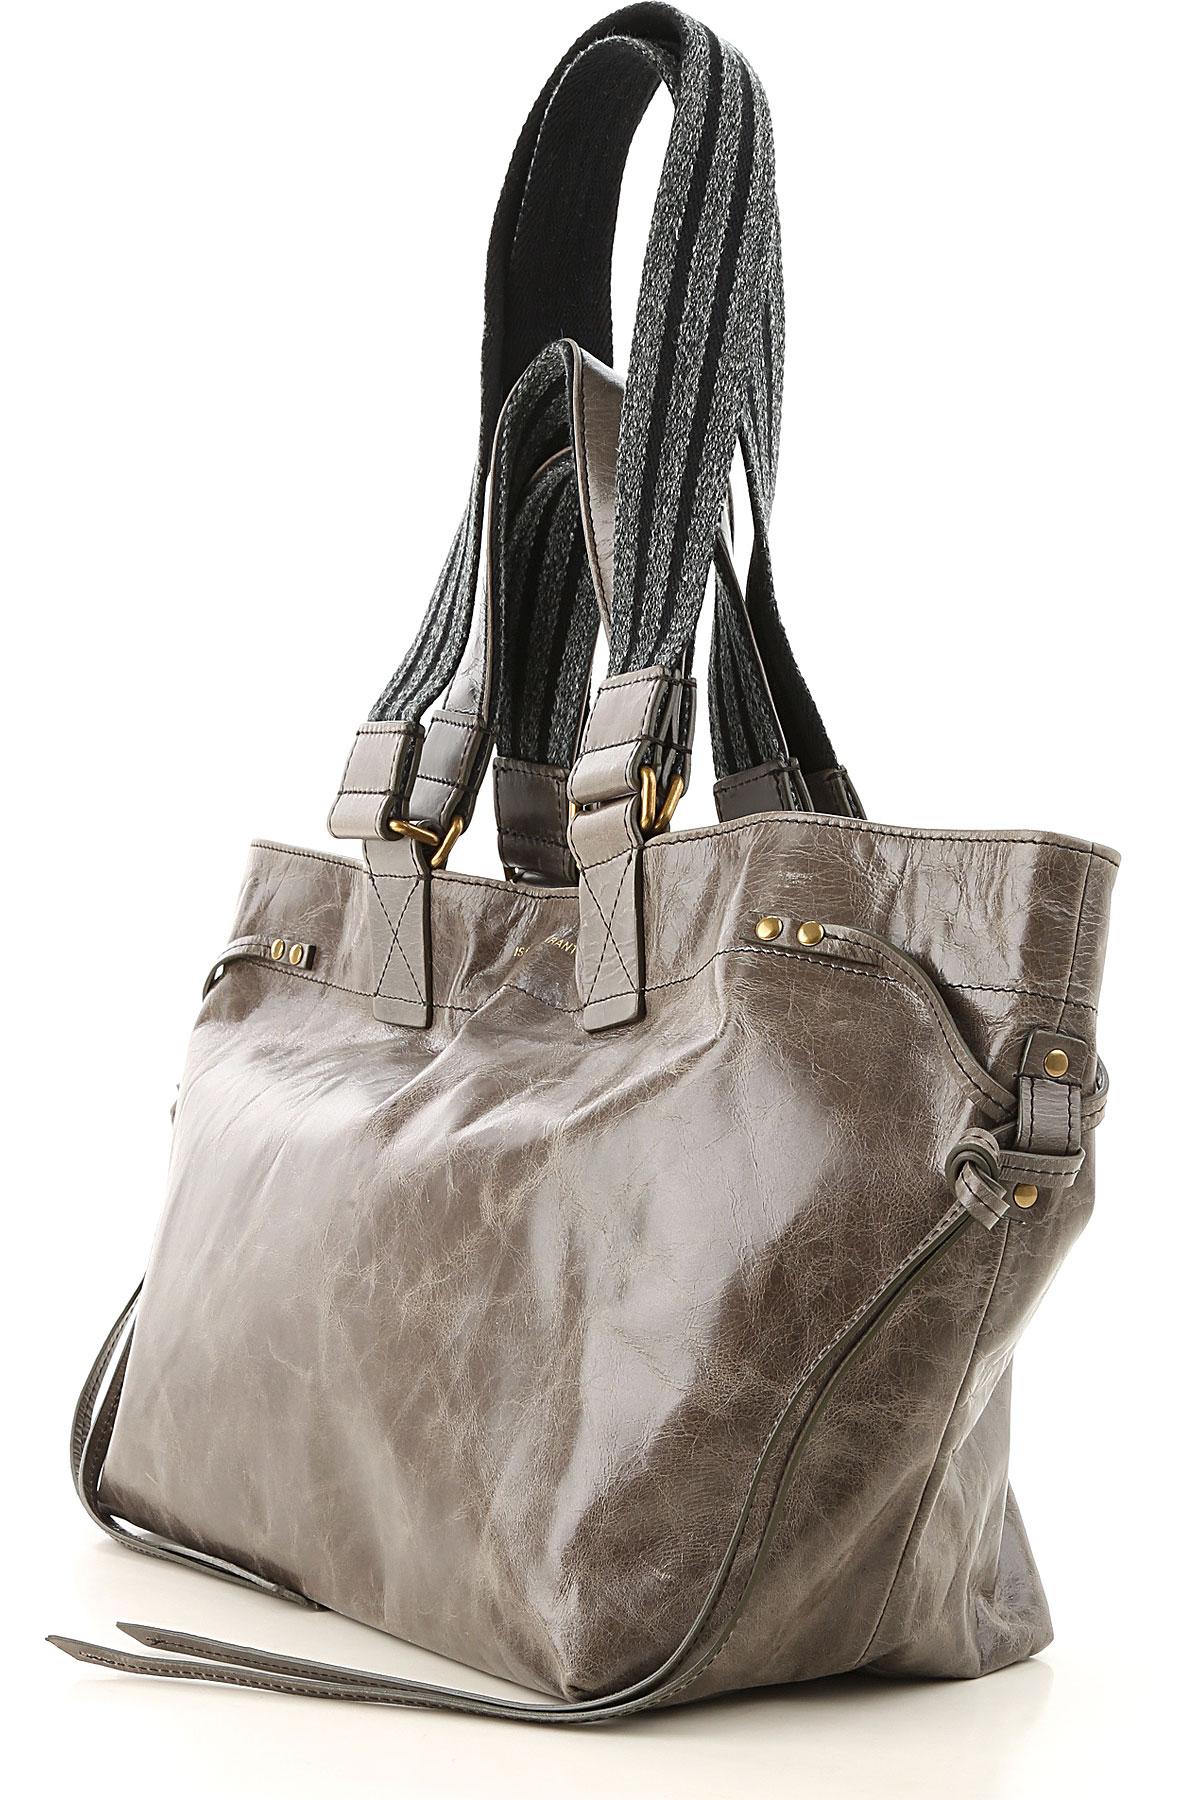 Isabel Marant Leather Tote Bag On Sale in Grey (Gray) - Lyst